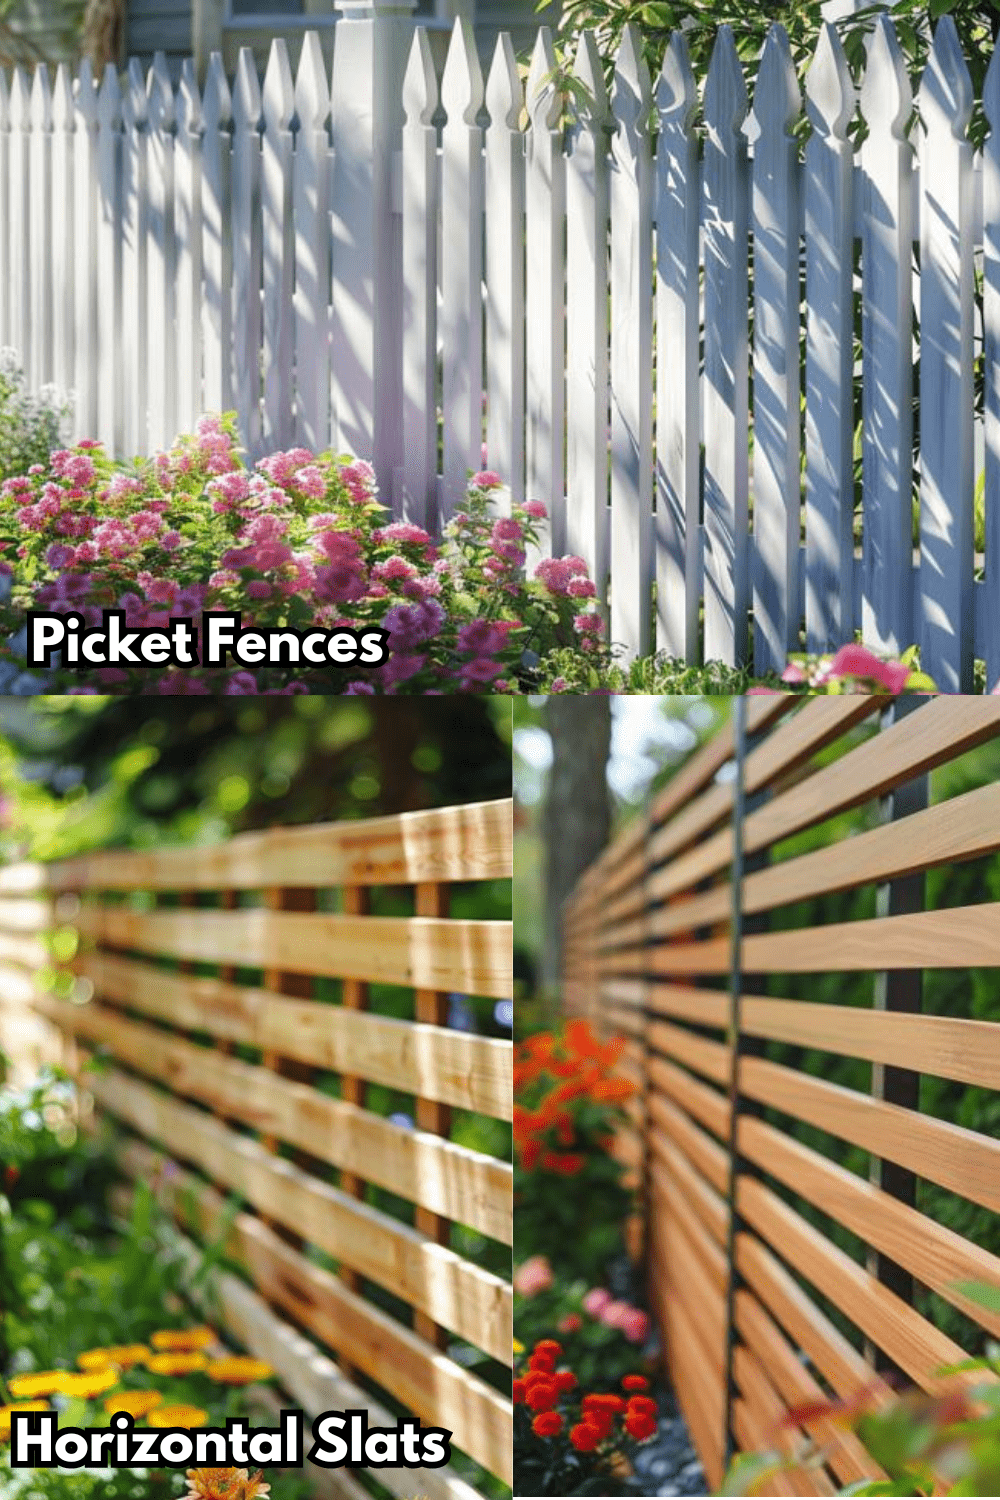 Low-Height Fences, picket fences and horizontal slats for privacy